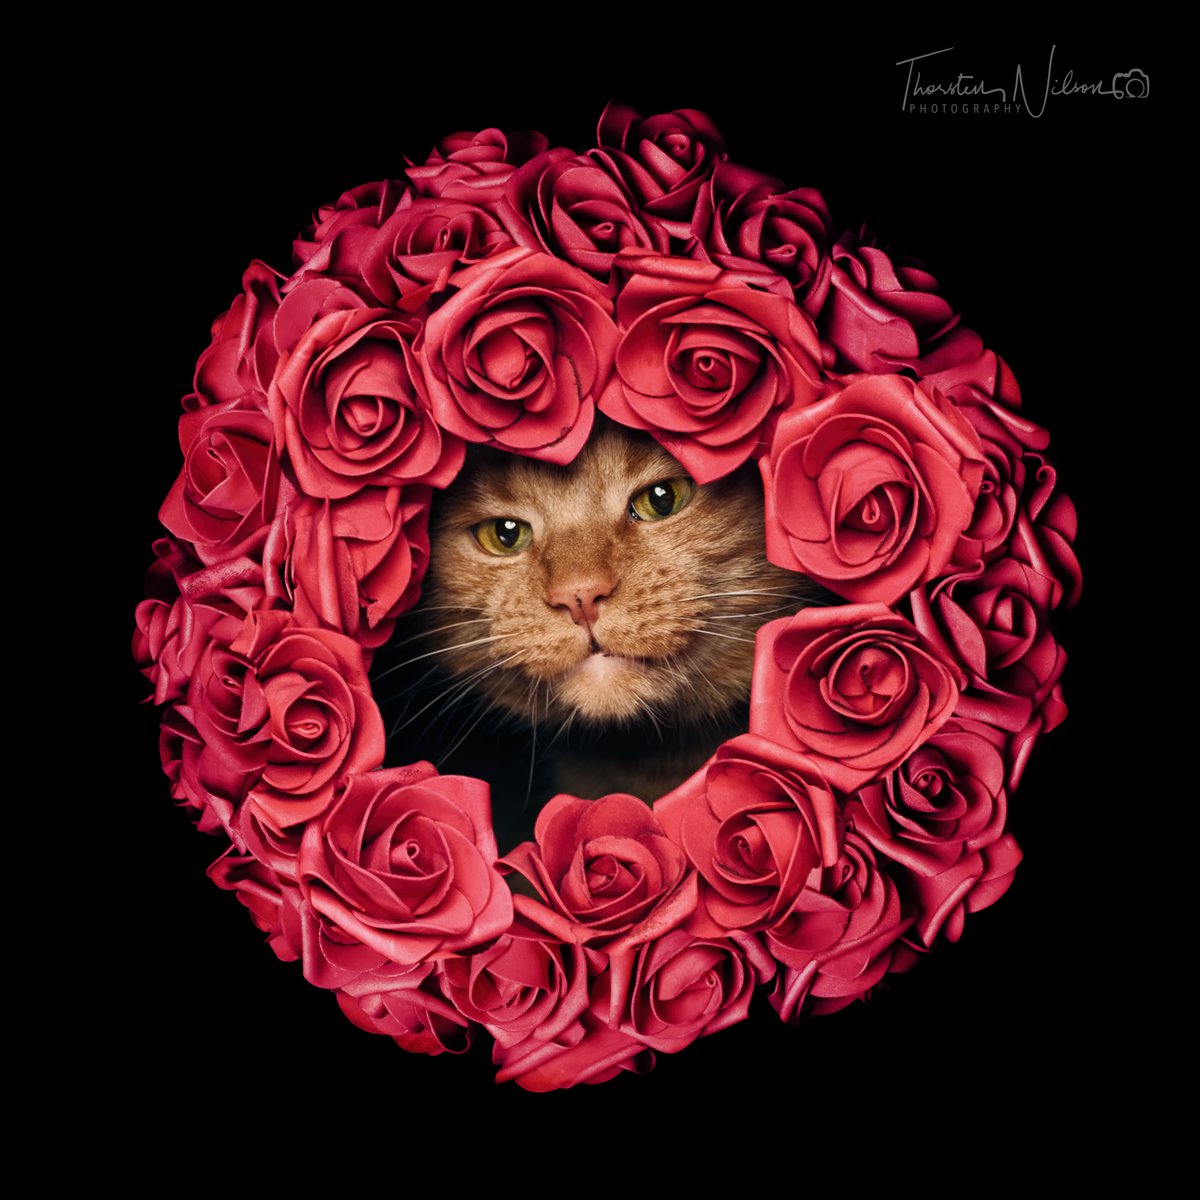 Trying to be a funny rose in a garden full of serious flowers. #CatsOfX #funnycat #roses #tierfotografie #tierfotografulm #ulm #neuulm #lightspruch